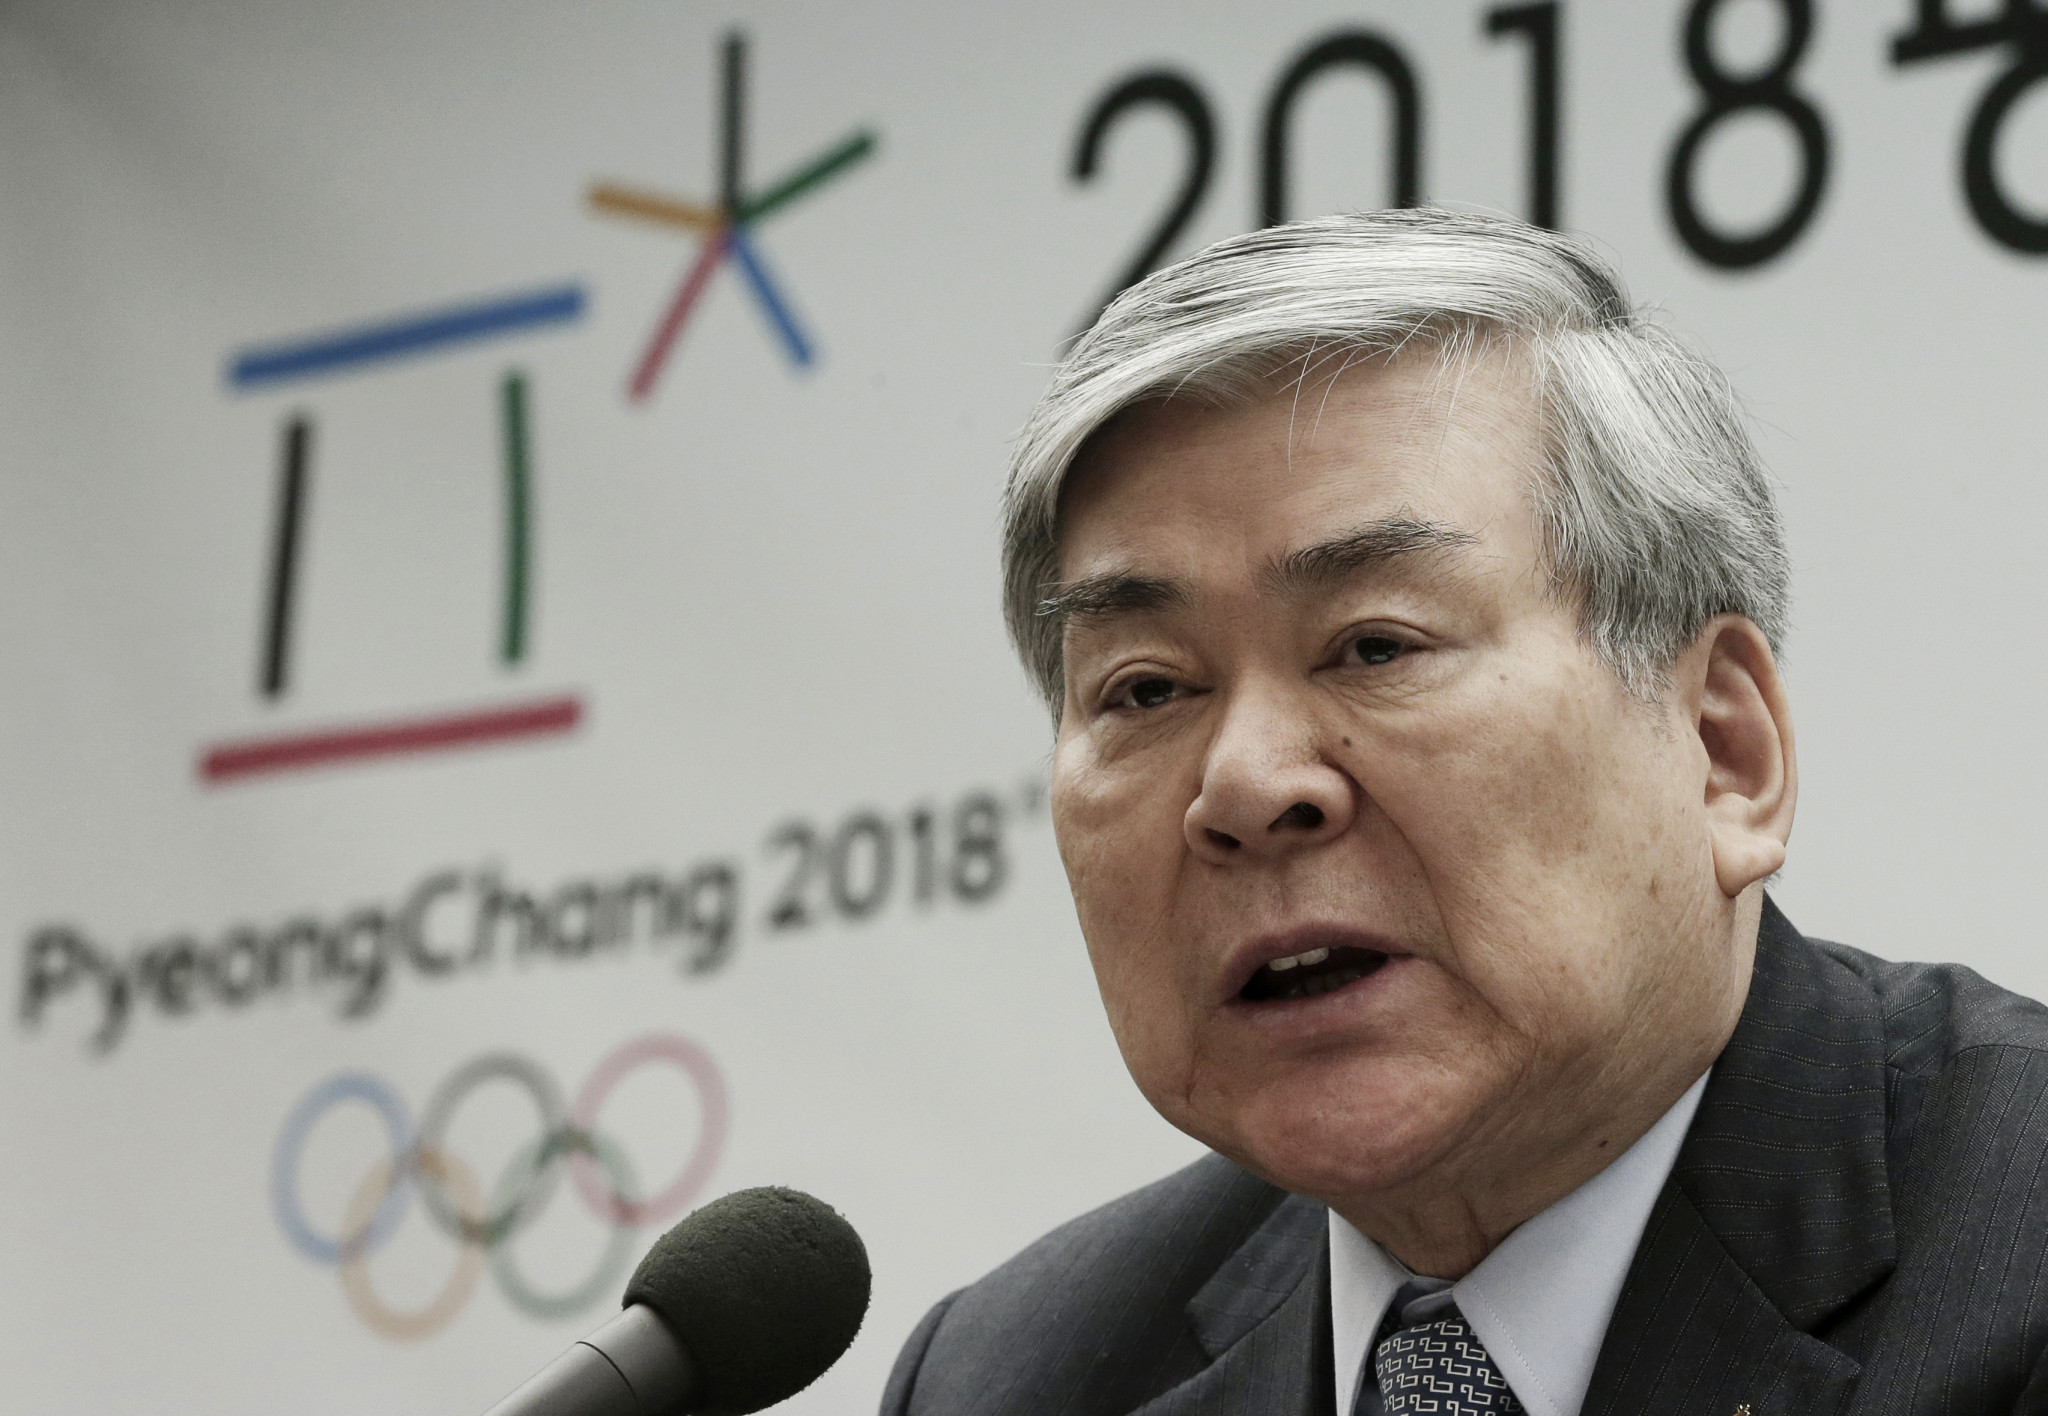 Former Pyeongchang 2018 President facing arrest over allegations he abused company funds